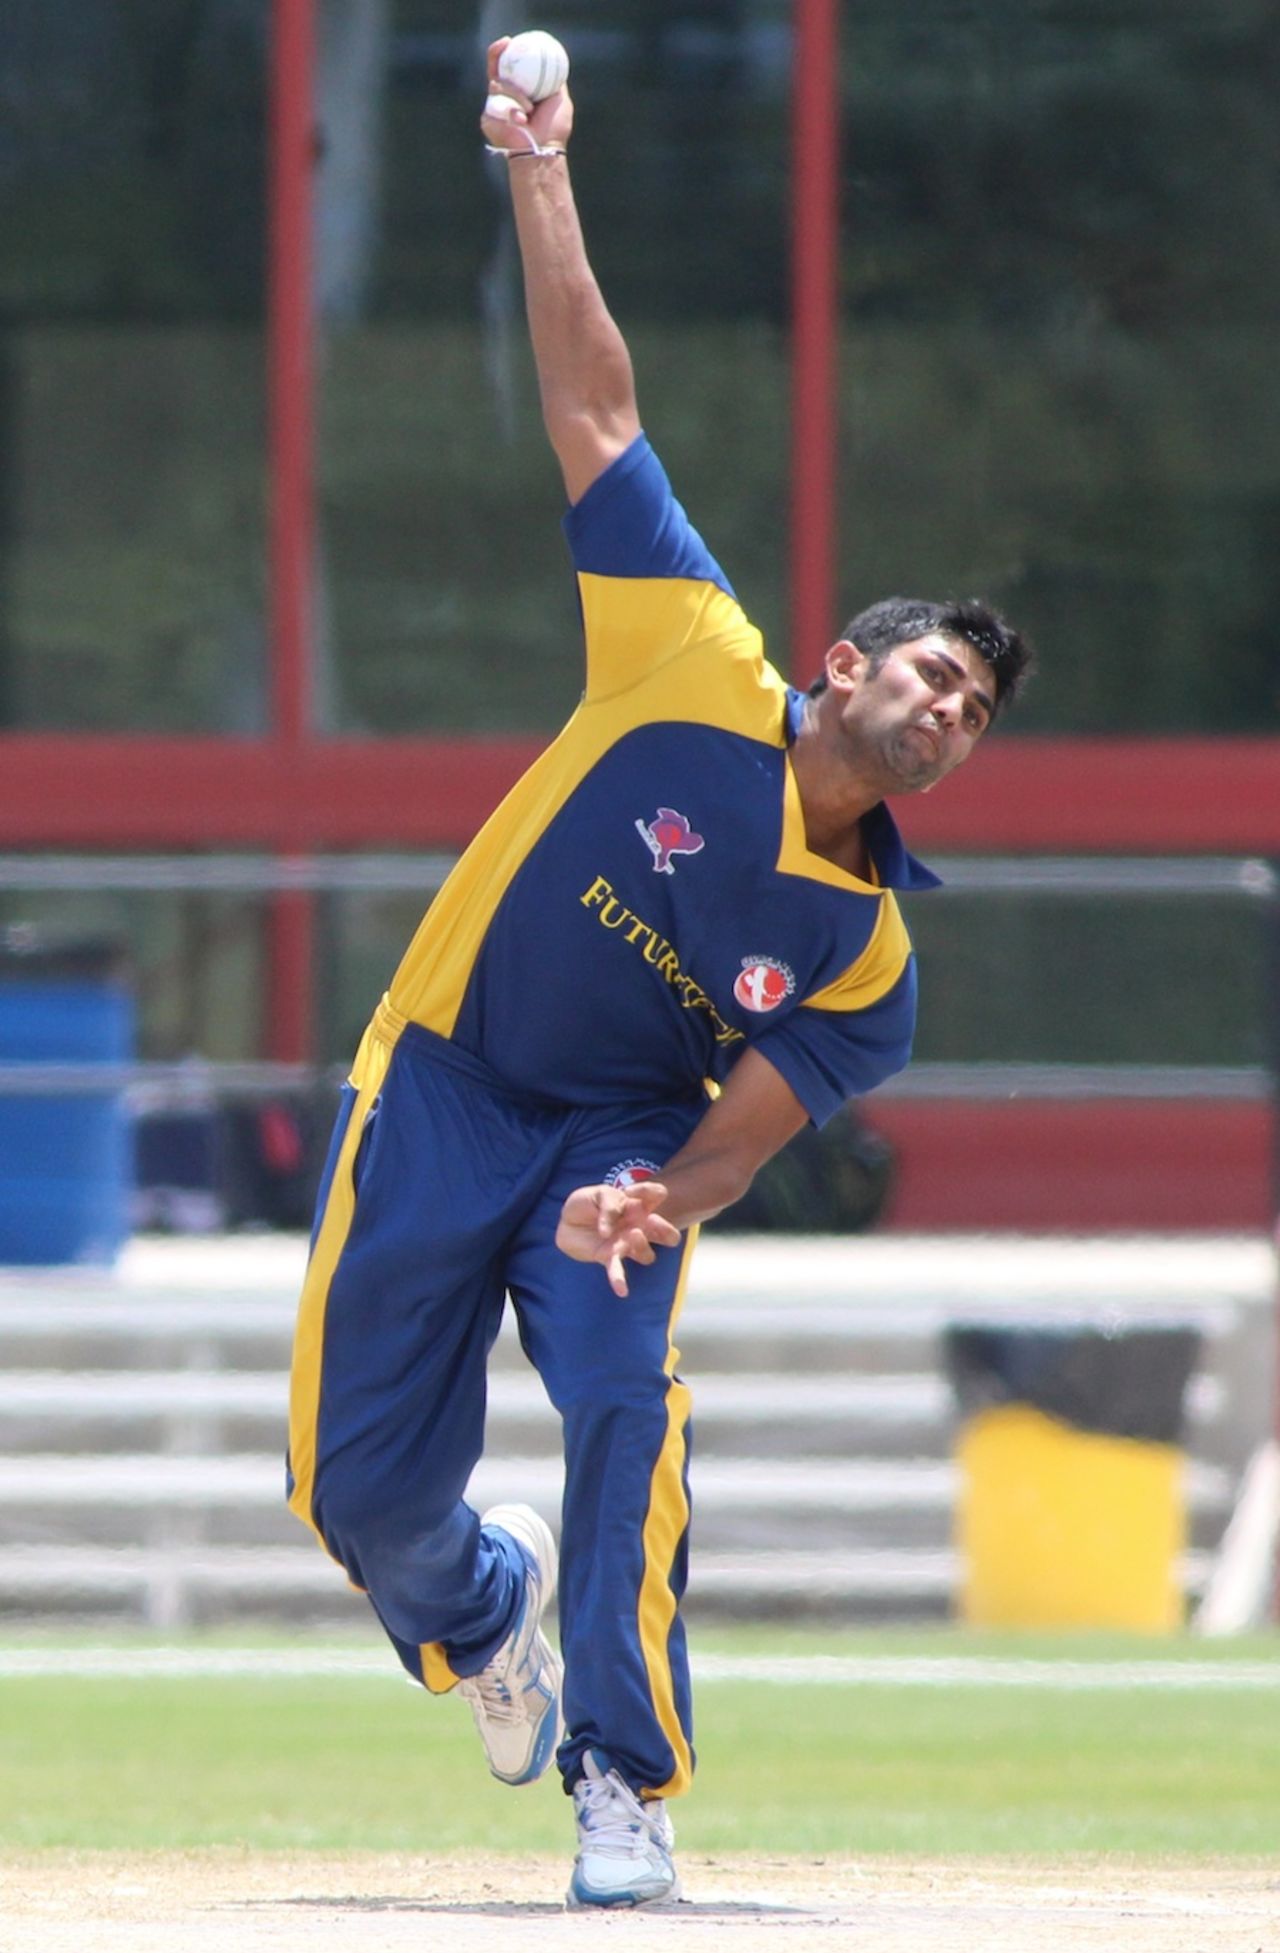 Japen Patel gets ready to bowl, Central East Region v South East Region, USACA T20 National Championship, Lauderhill, August 14, 2014